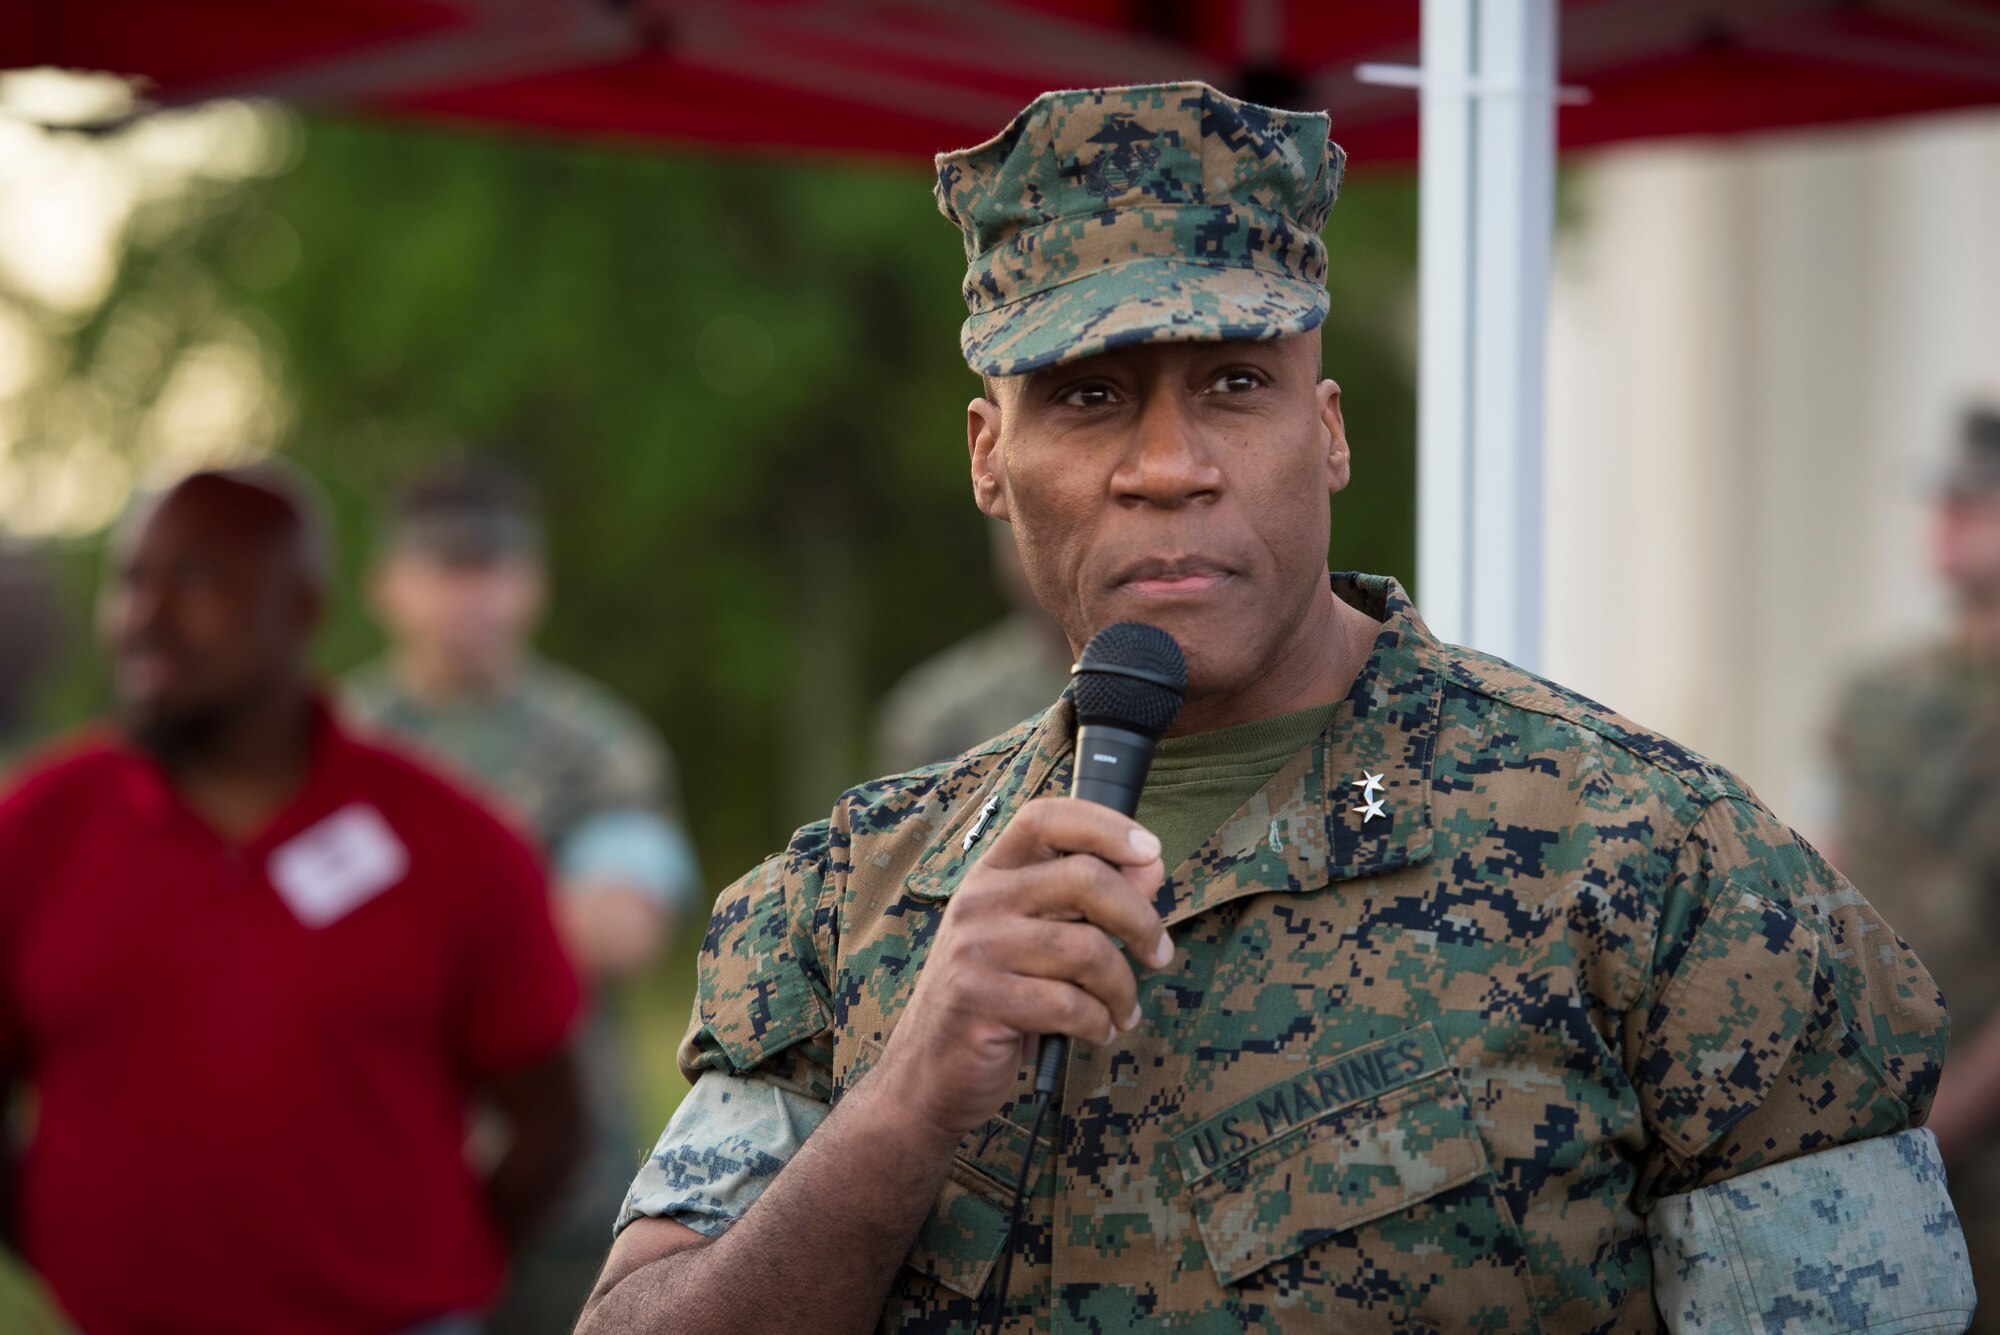 U.S. Marine Corps Maj. Gen. Michael E. Langley, U.S. Central Command Director of Strategy, Plans and Policy, talks about the importance of Sexual Assault Prevention and Response at MacDill Air Force Base, Fla., April 5, 2019.